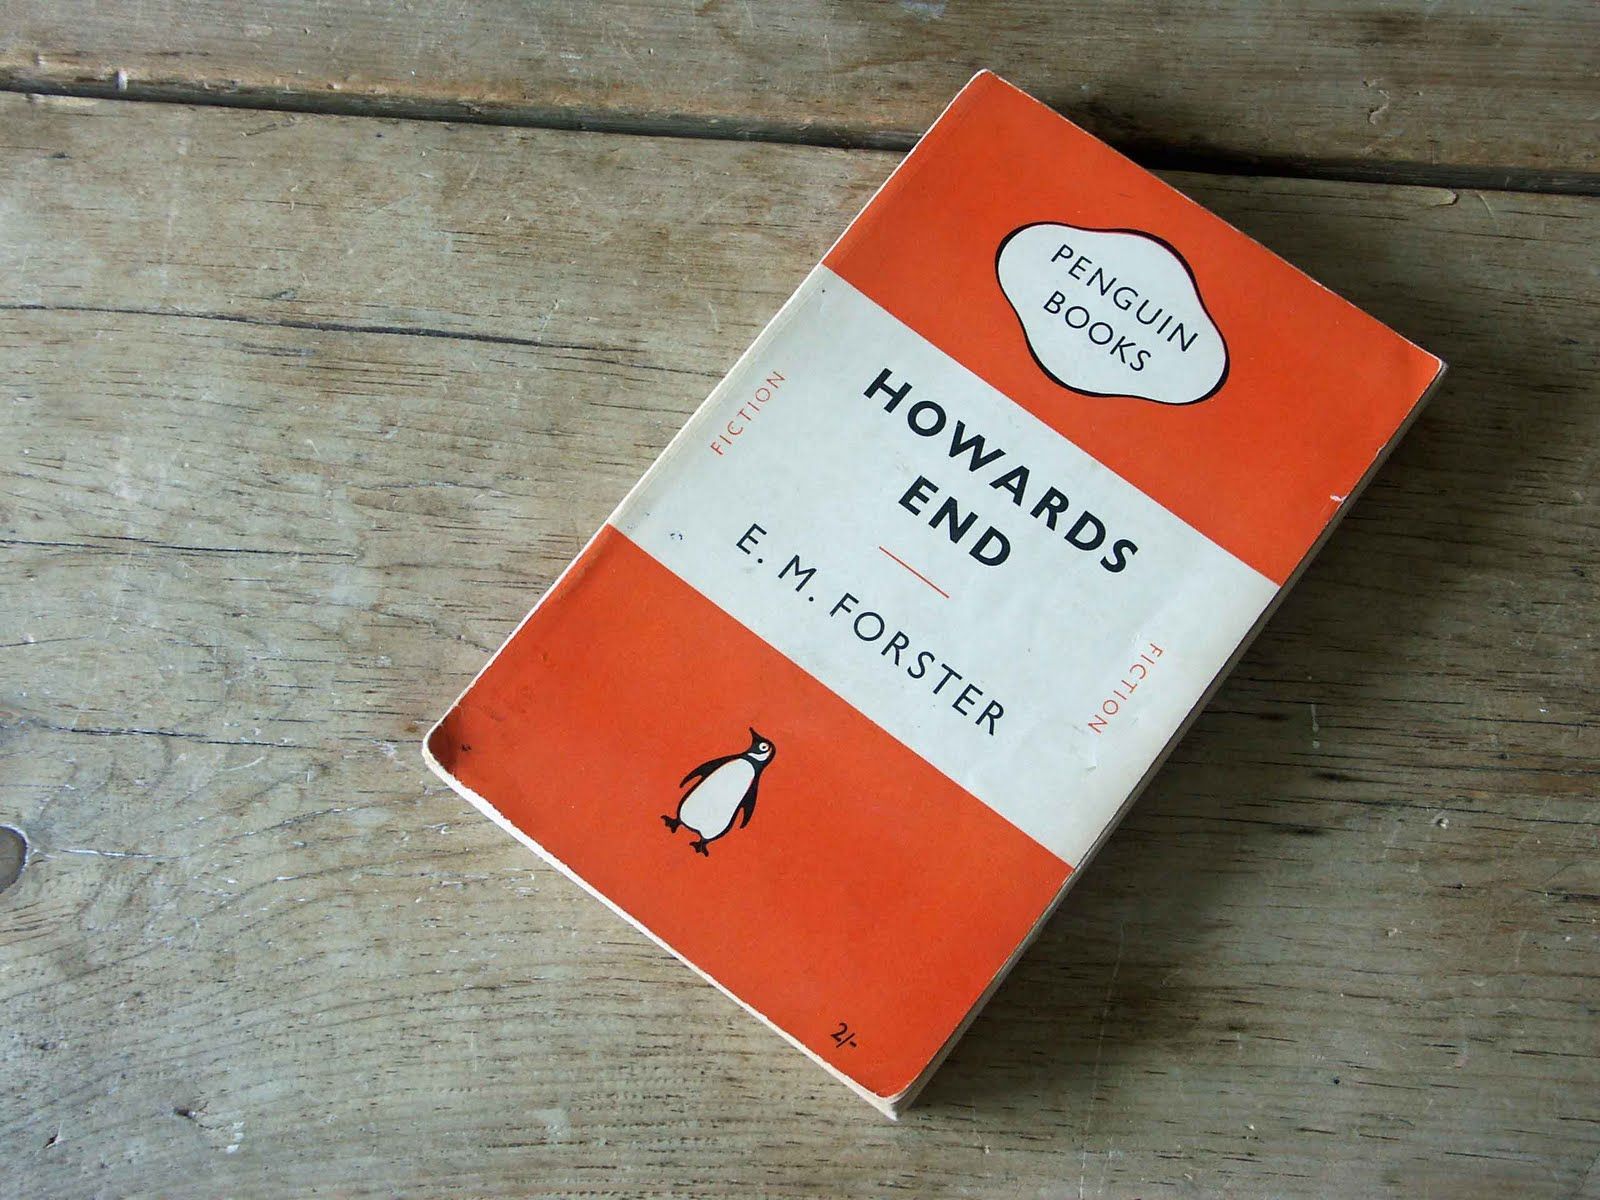 11-extraordinary-facts-about-howards-end-e-m-forster